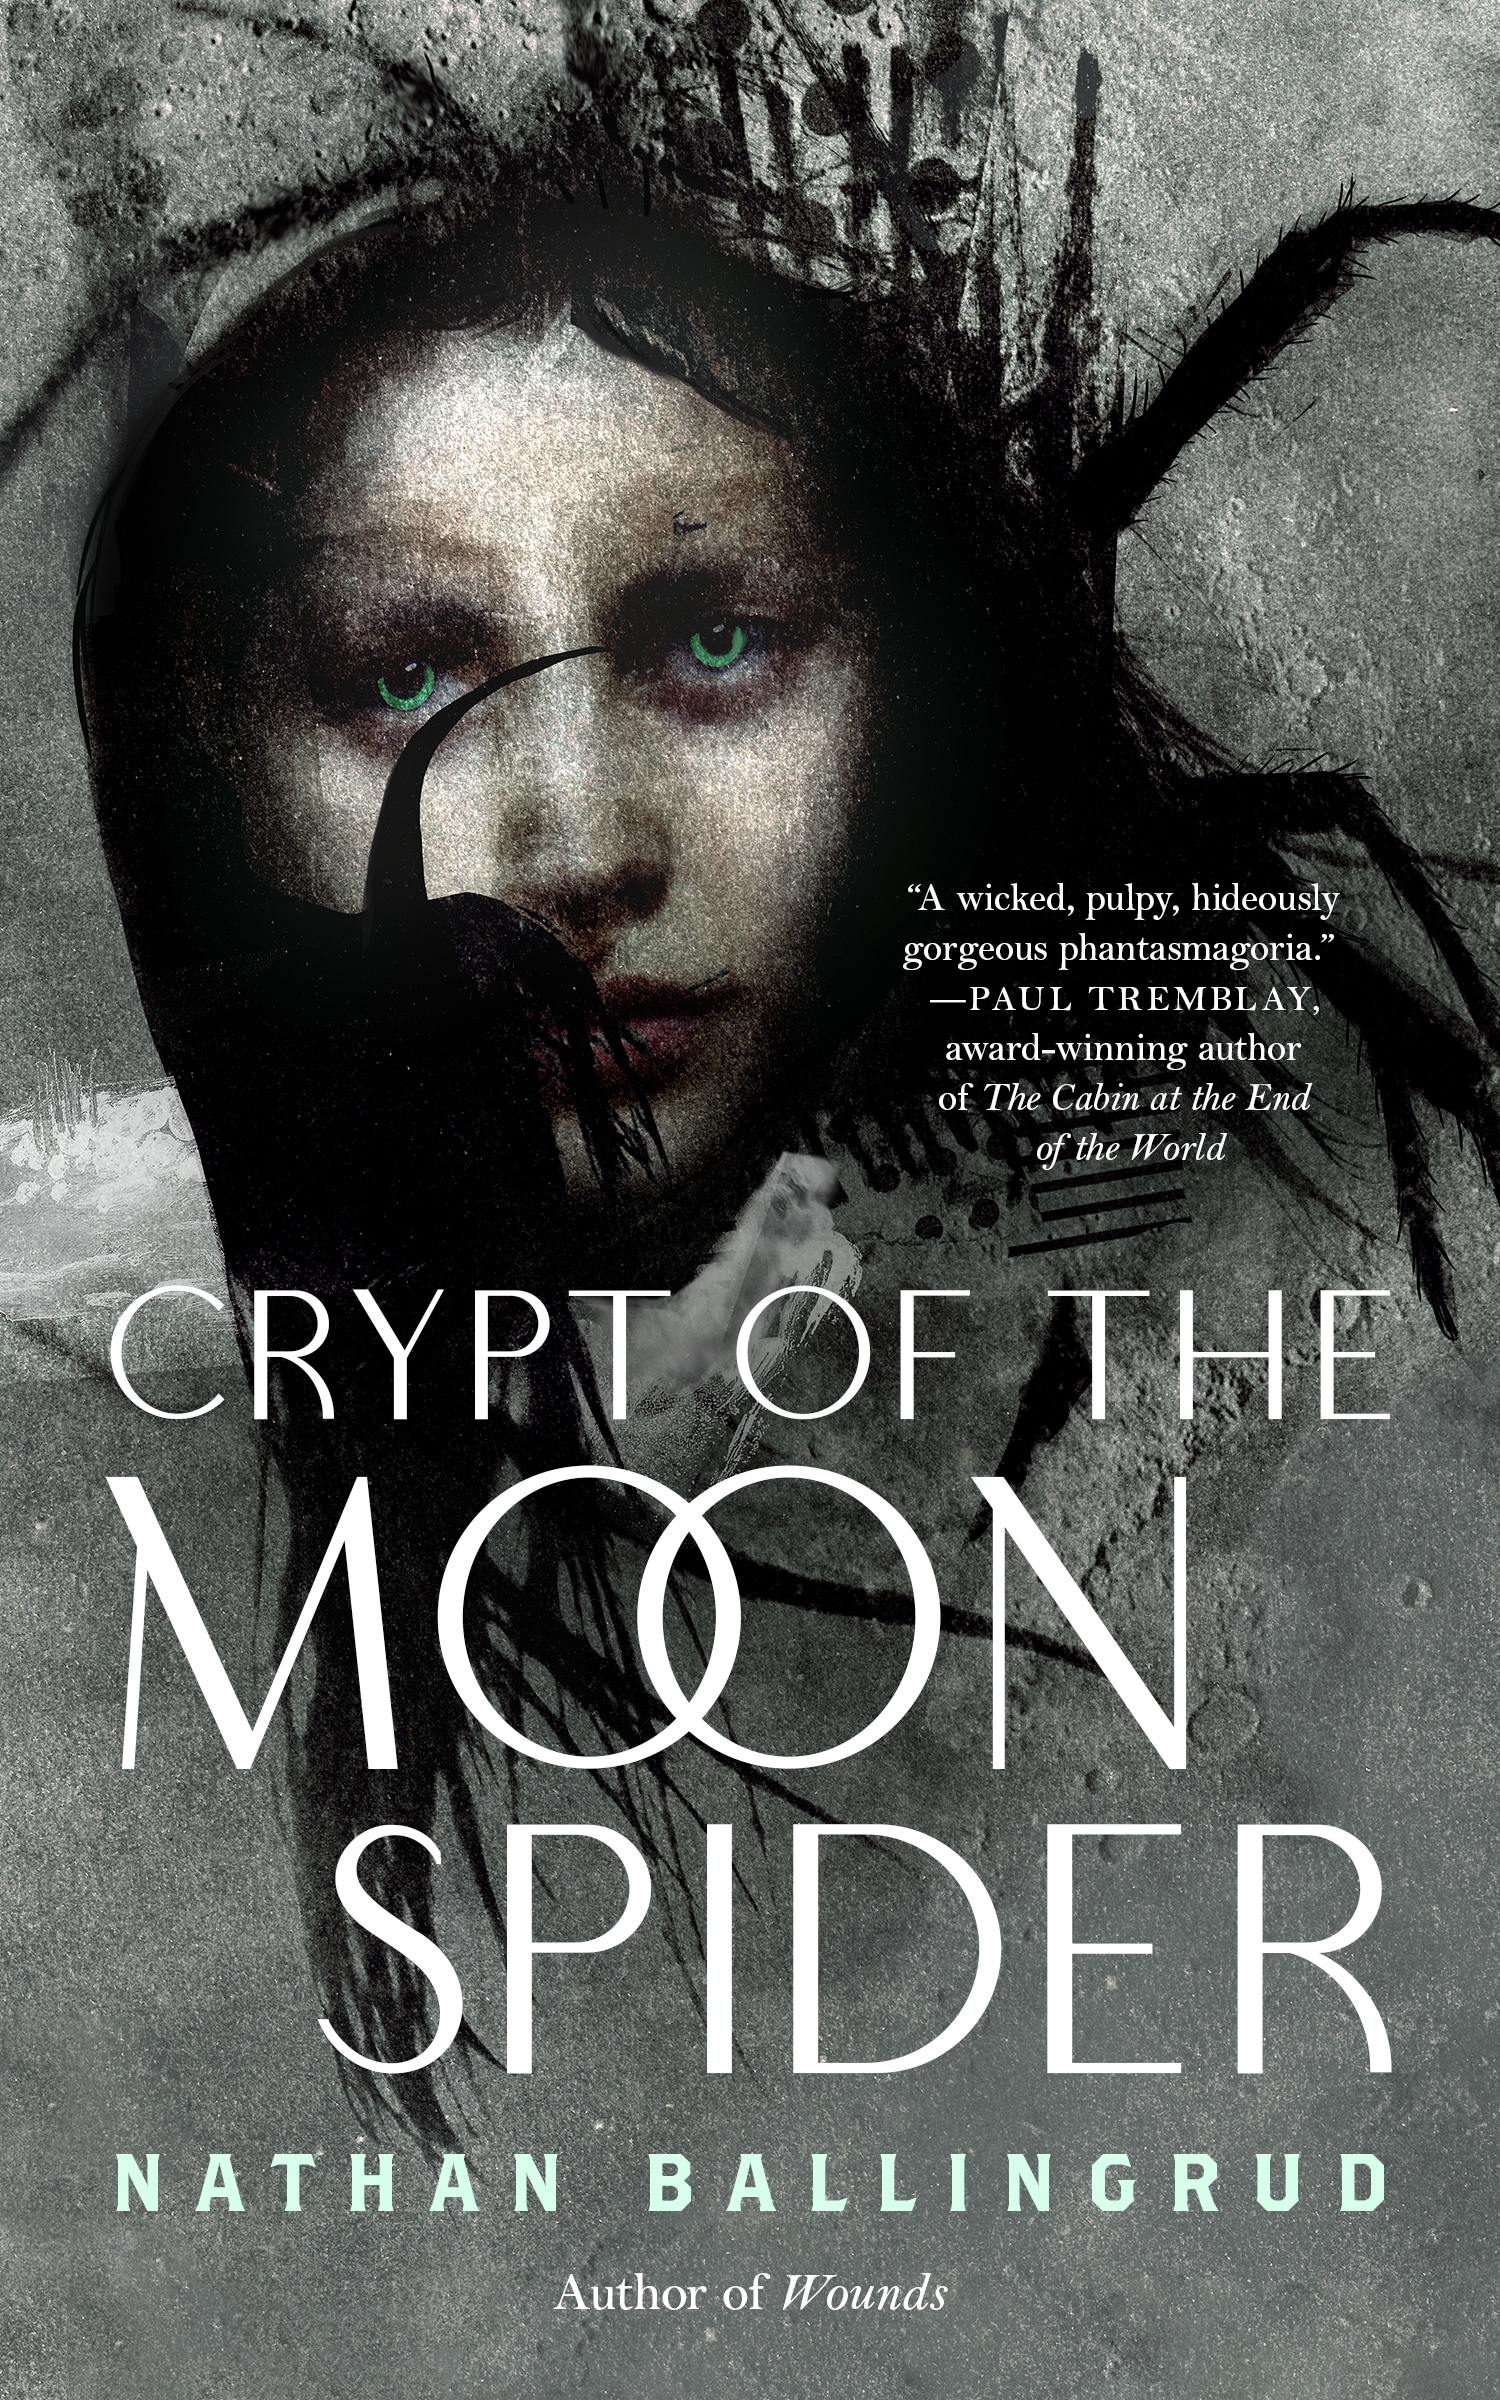 Crypt of the Moon Spider by Nathan Ballingrud